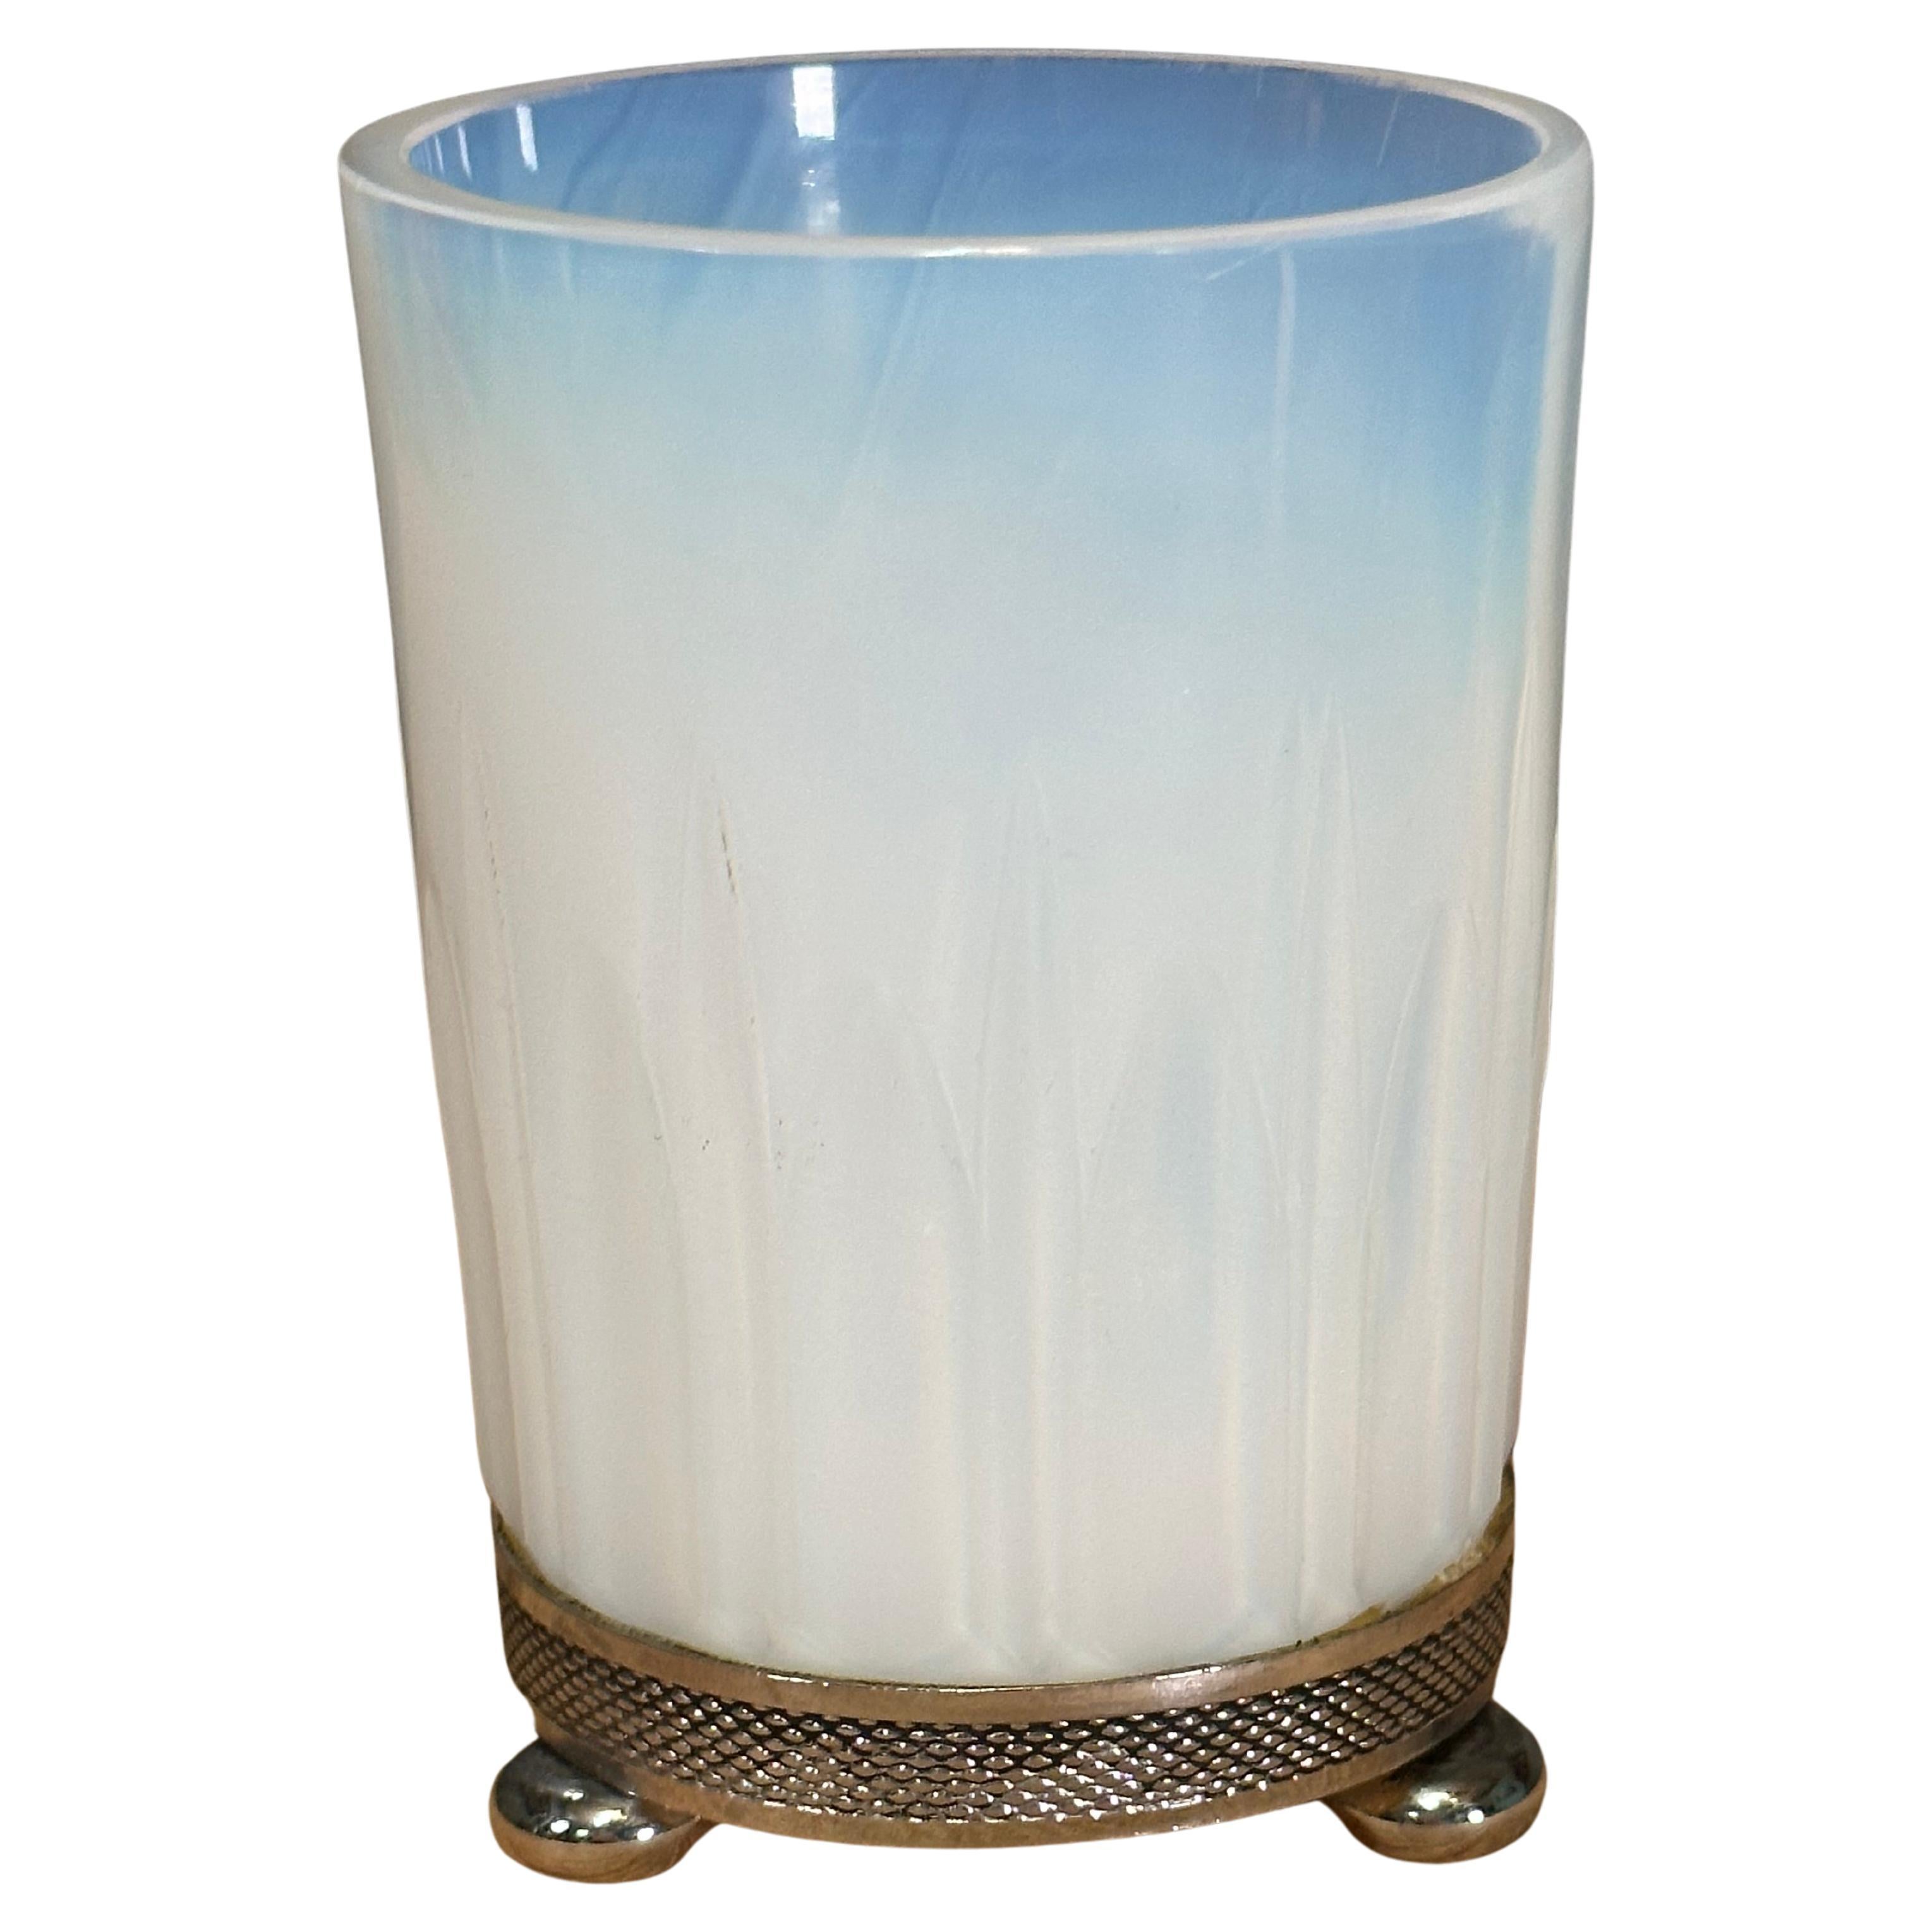 Art Deco Opalescent Glass and Silver Bowl, Vase style Lalique, Sabino. France